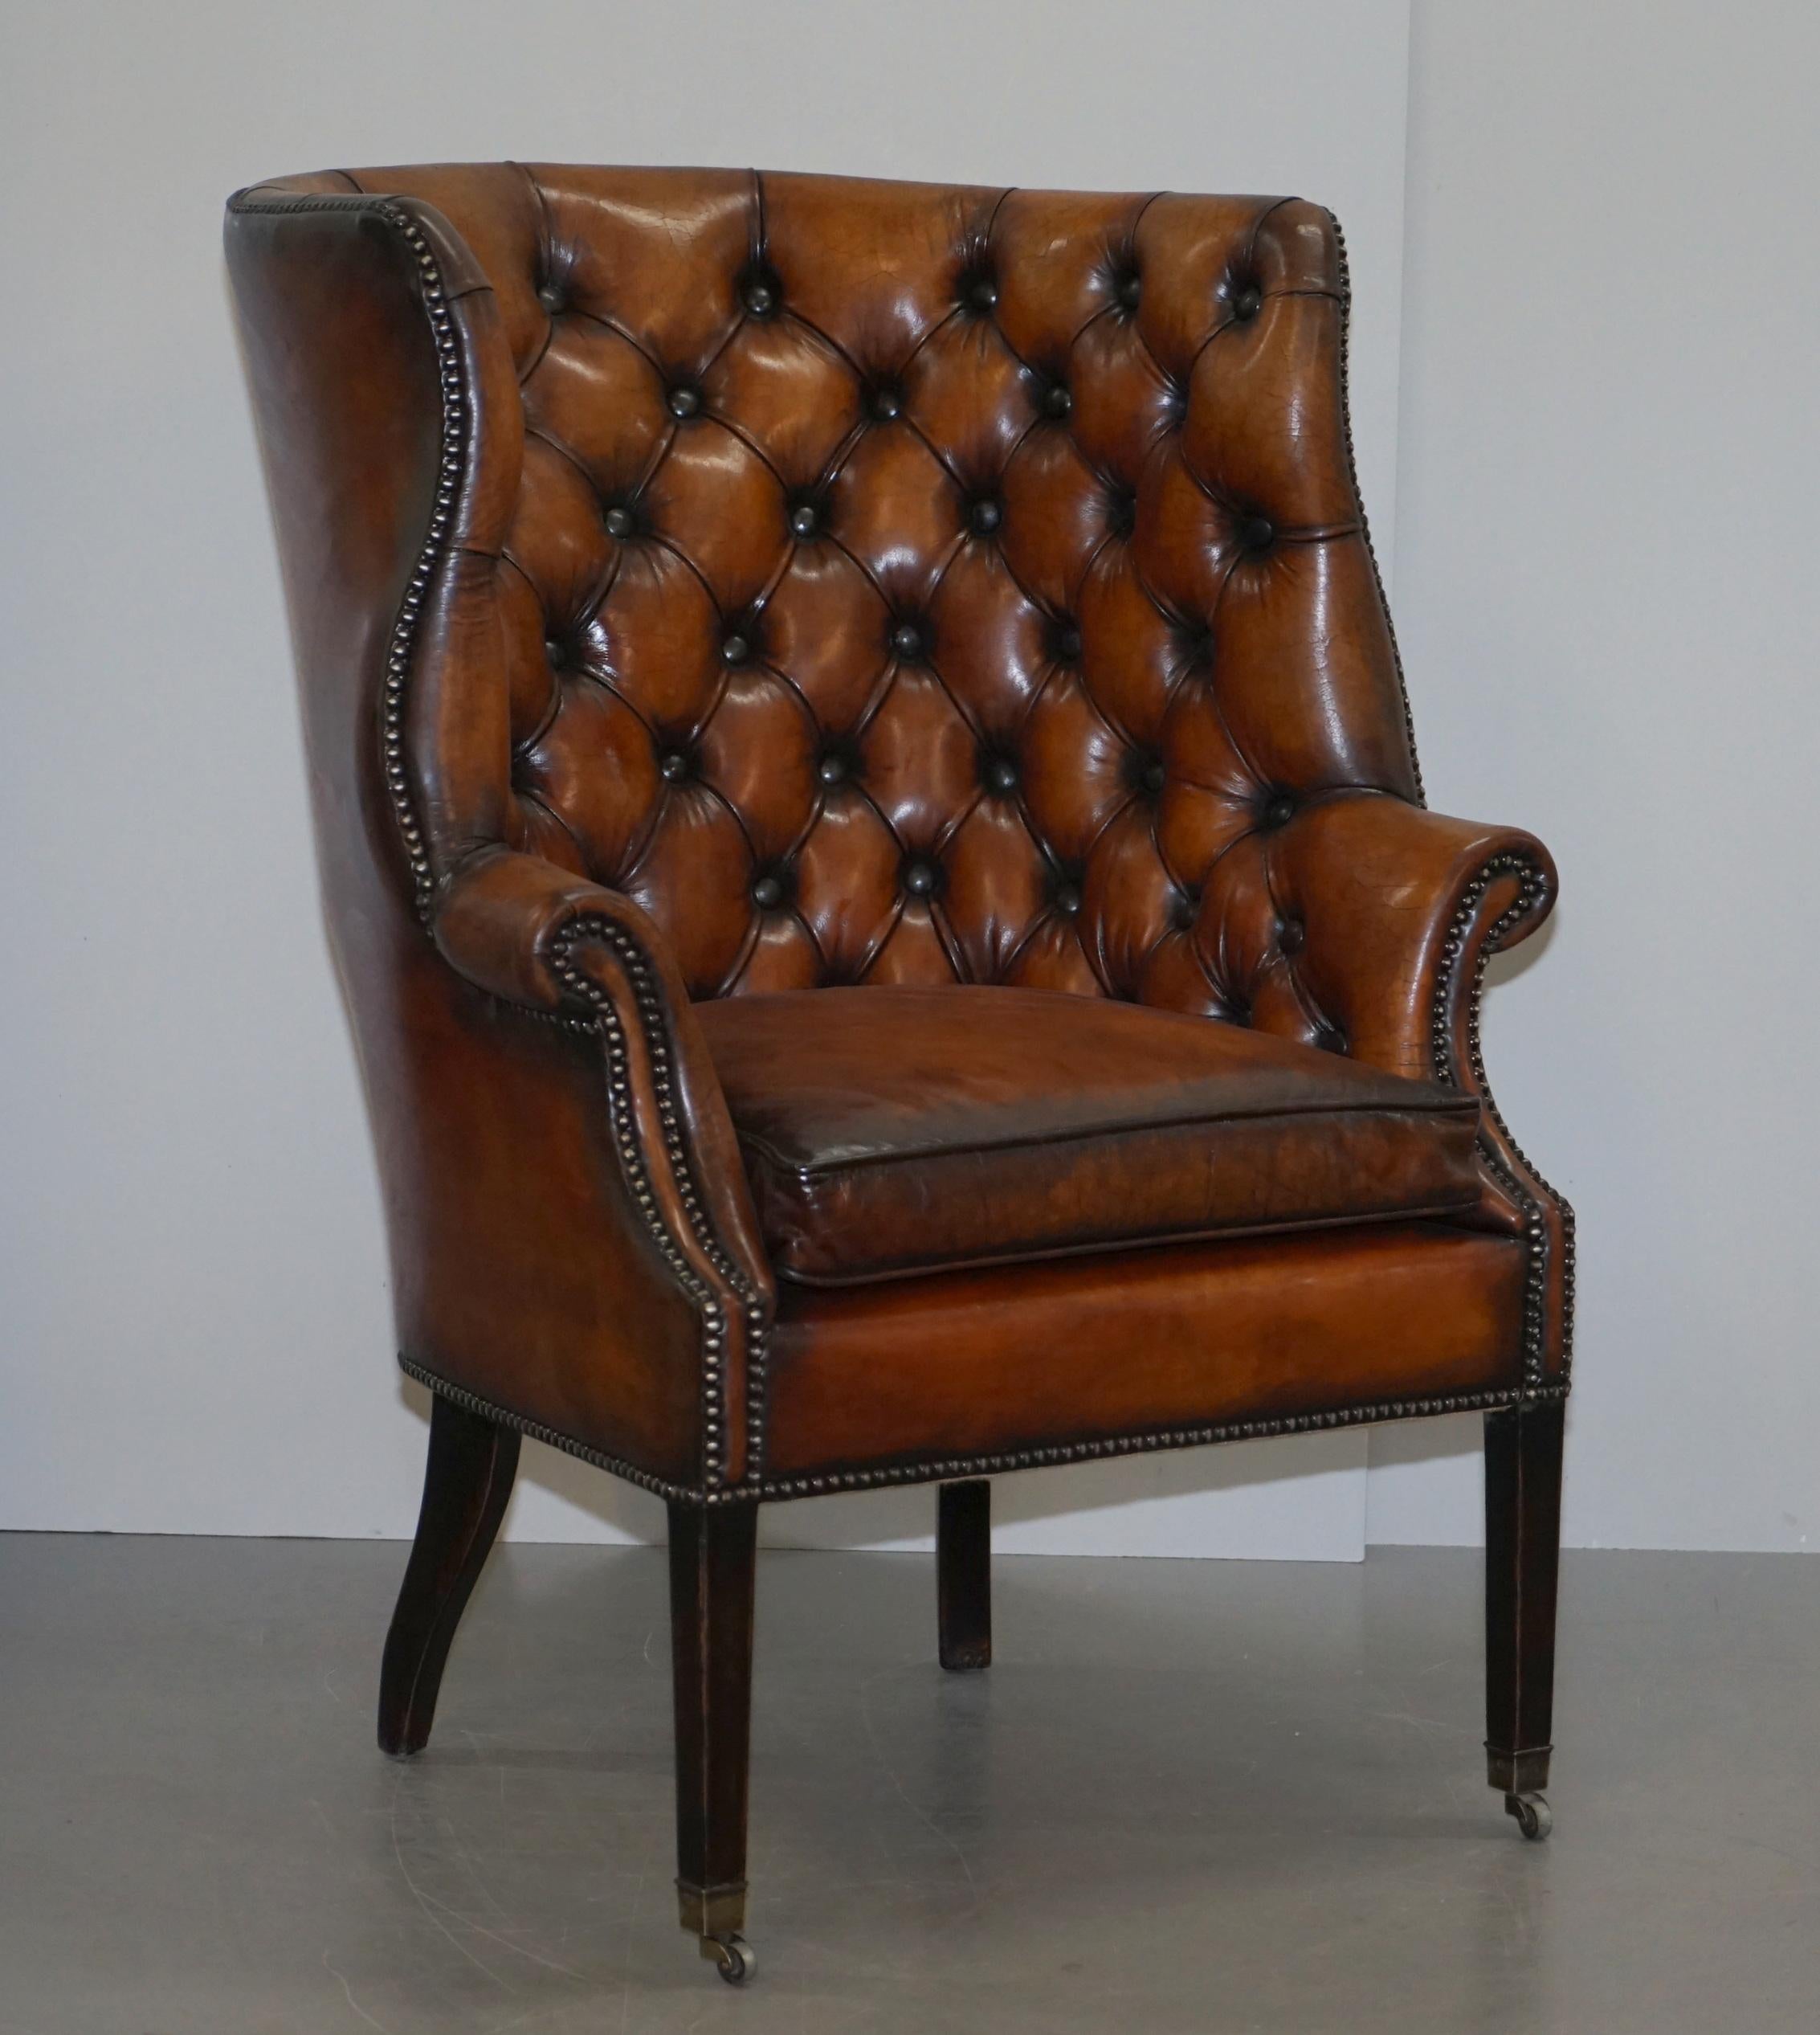 We are delighted to offer for sale this very nice pair of fully restored RRP £23,000 Ralph Lauren hand dyed cigar brown leather porters armchairs

These chairs are rare, they stopped making them many years ago, they are large important looking